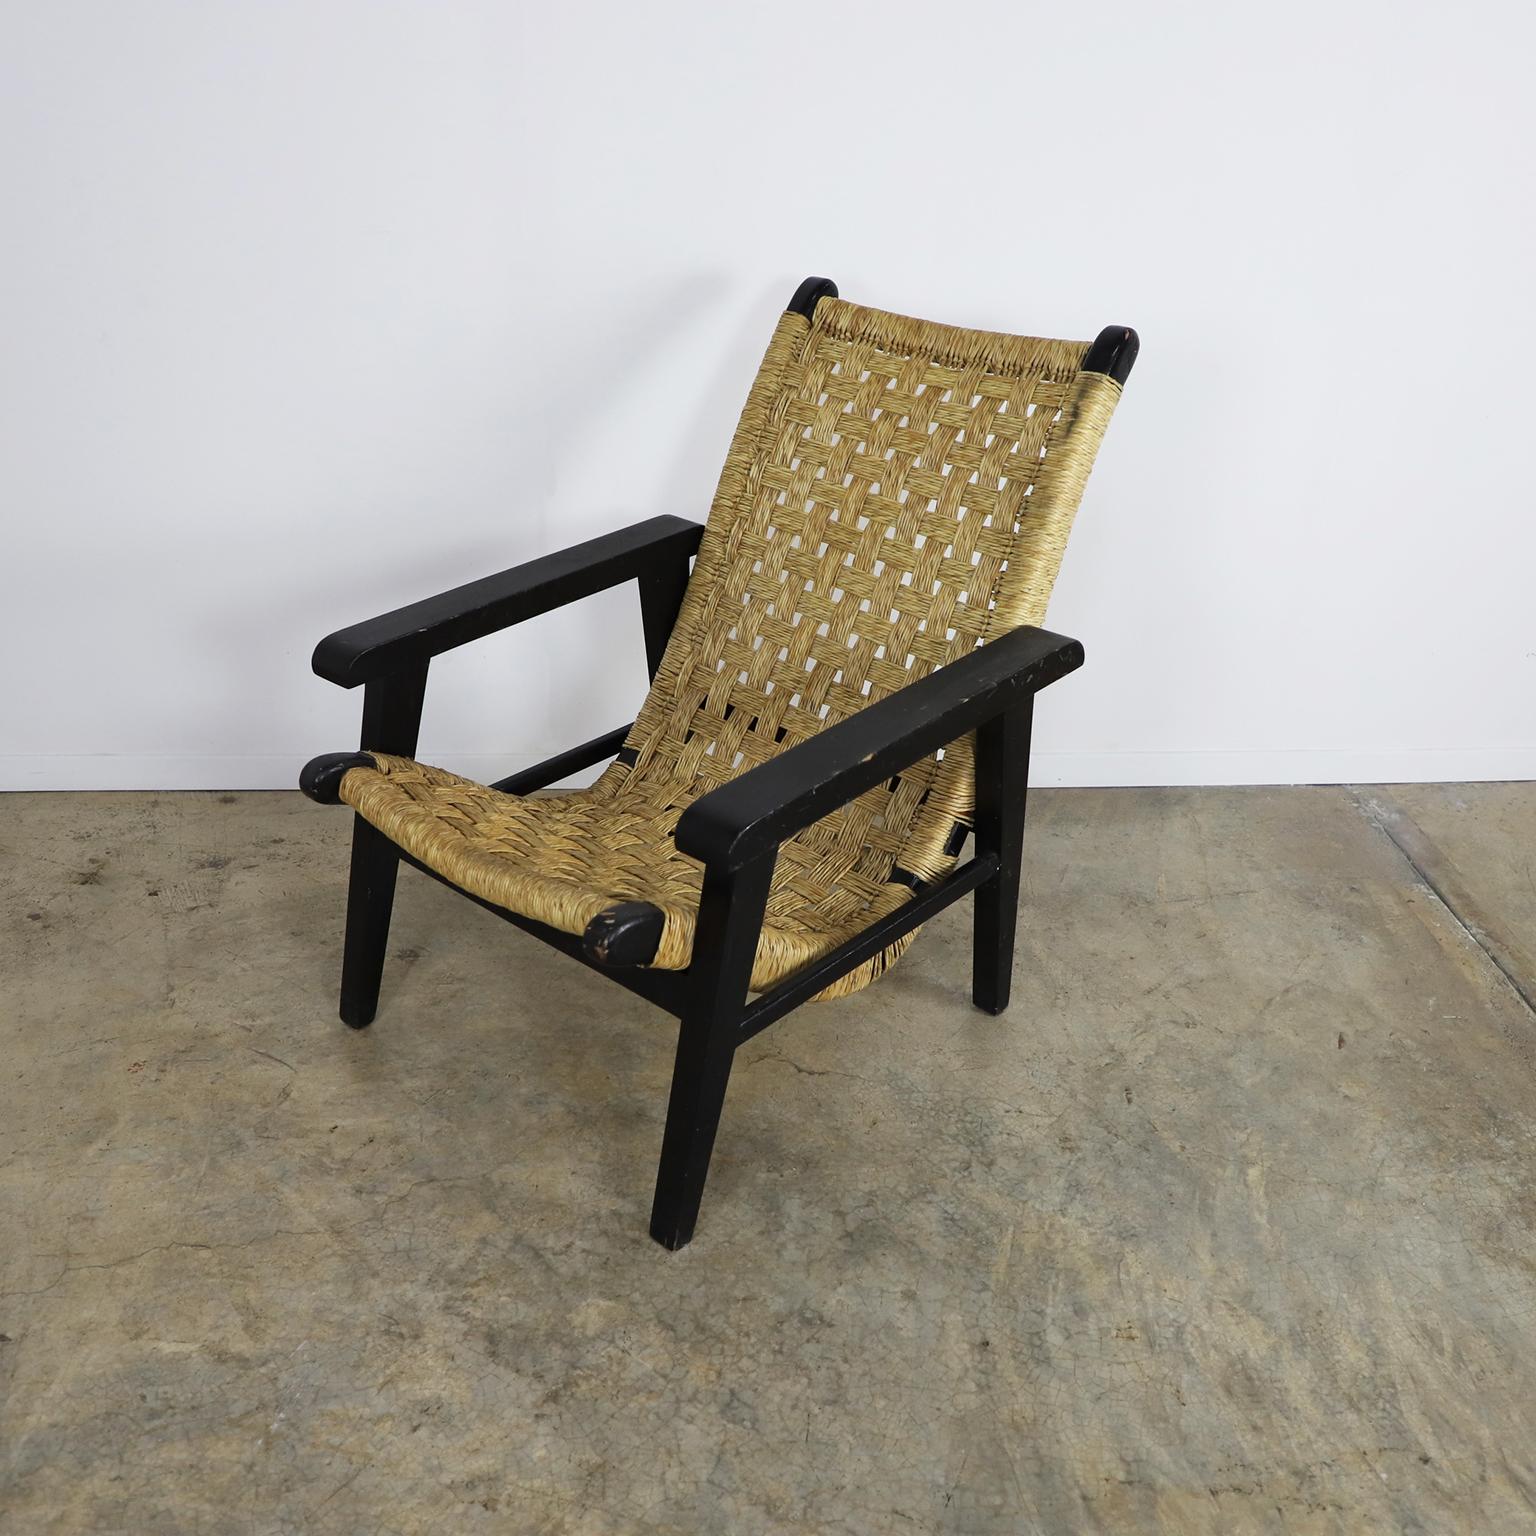 We offer this Mexican San Miguelito chair in the style to Michael Van Beuren, circa 1950 in primavera wood.